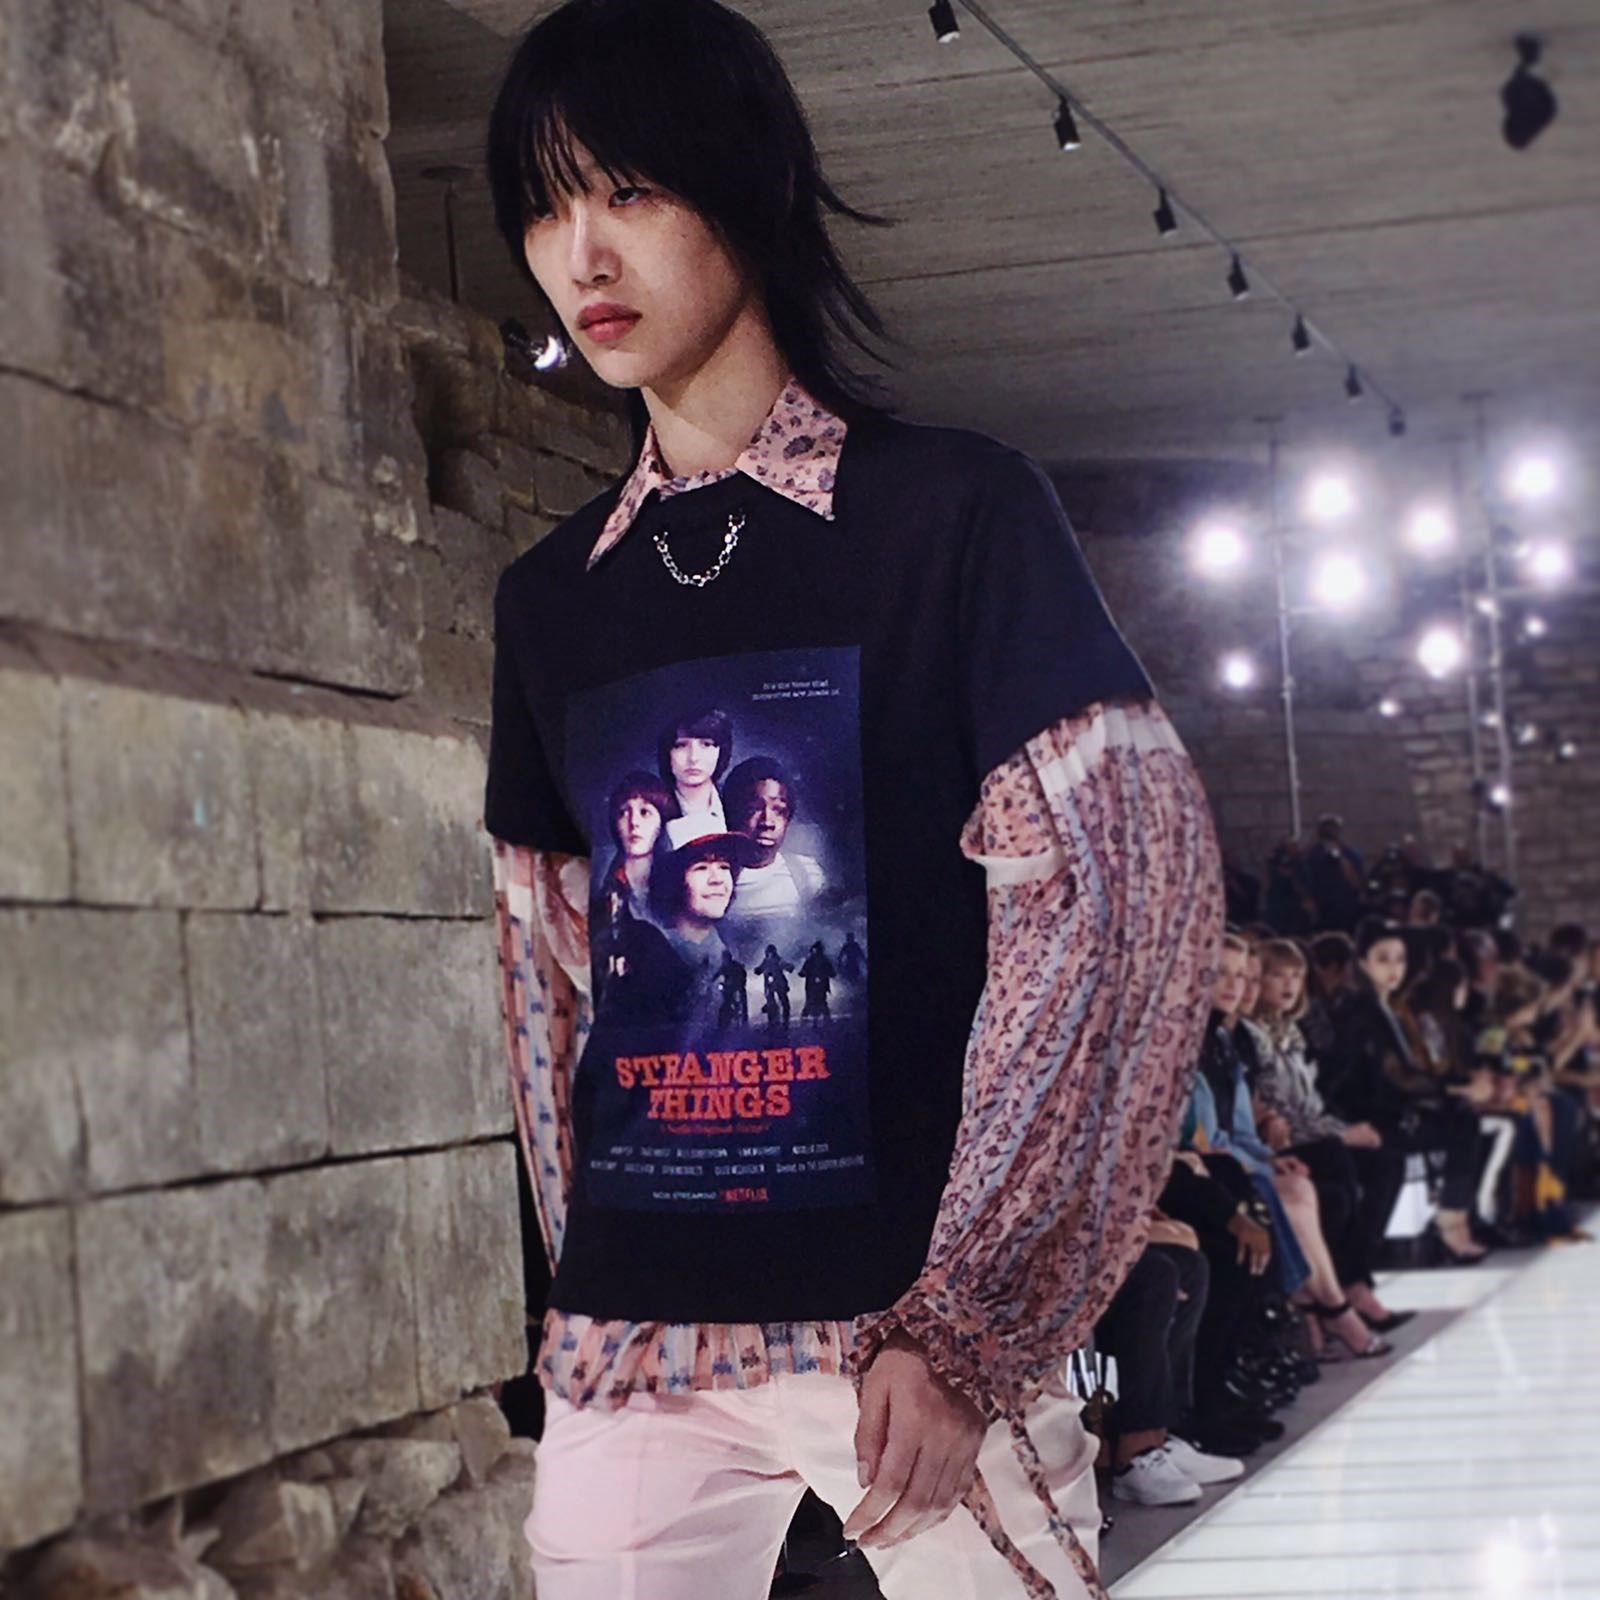 Sora Choi walks the runway during the Louis Vuitton Ready to Wear